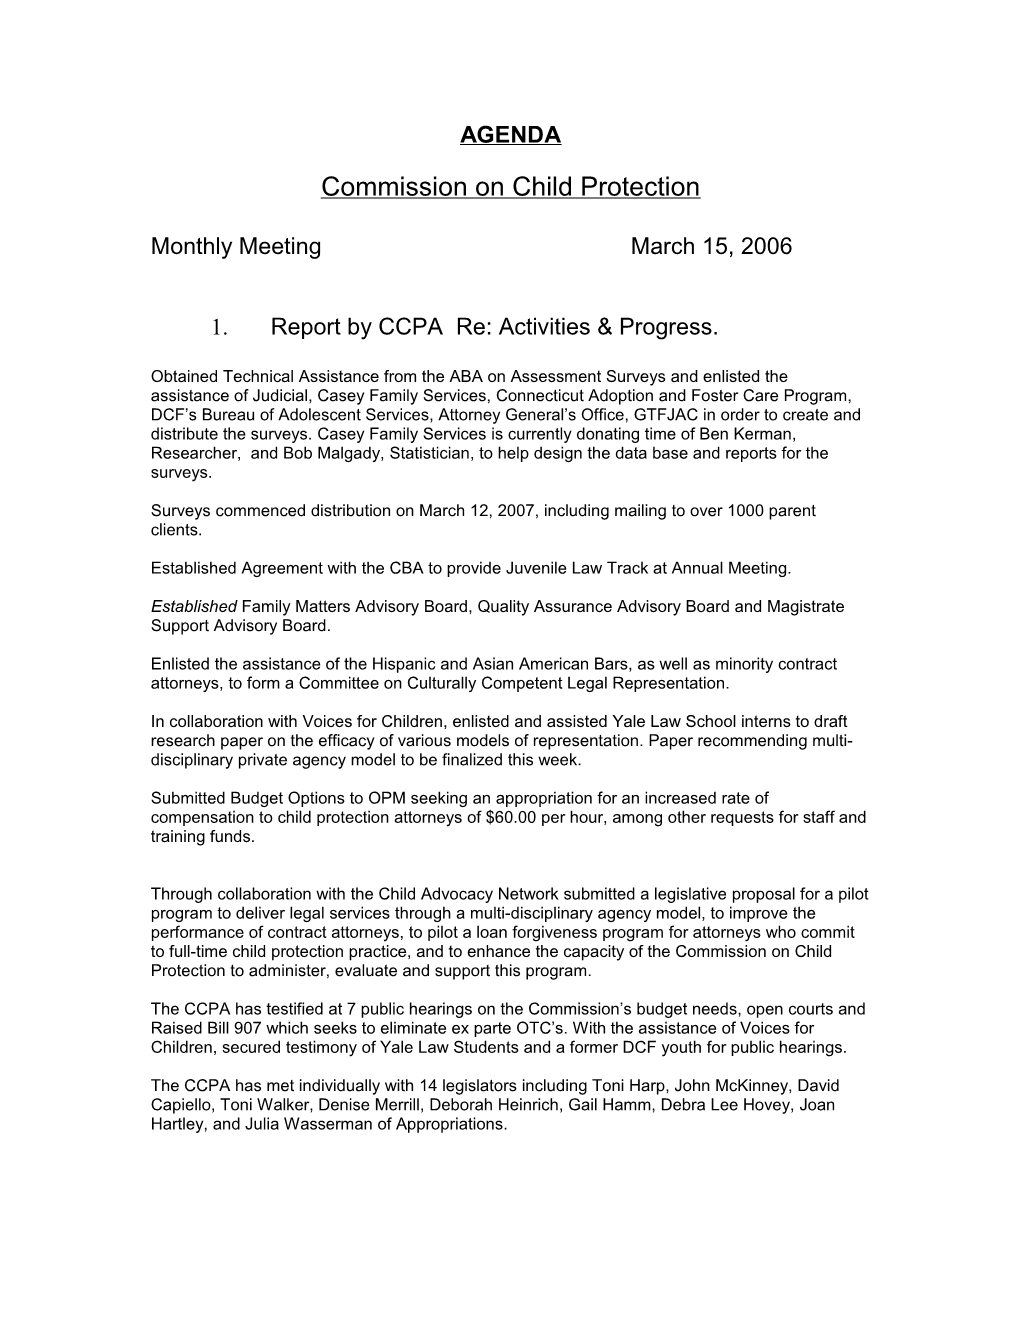 Commission on Child Protection